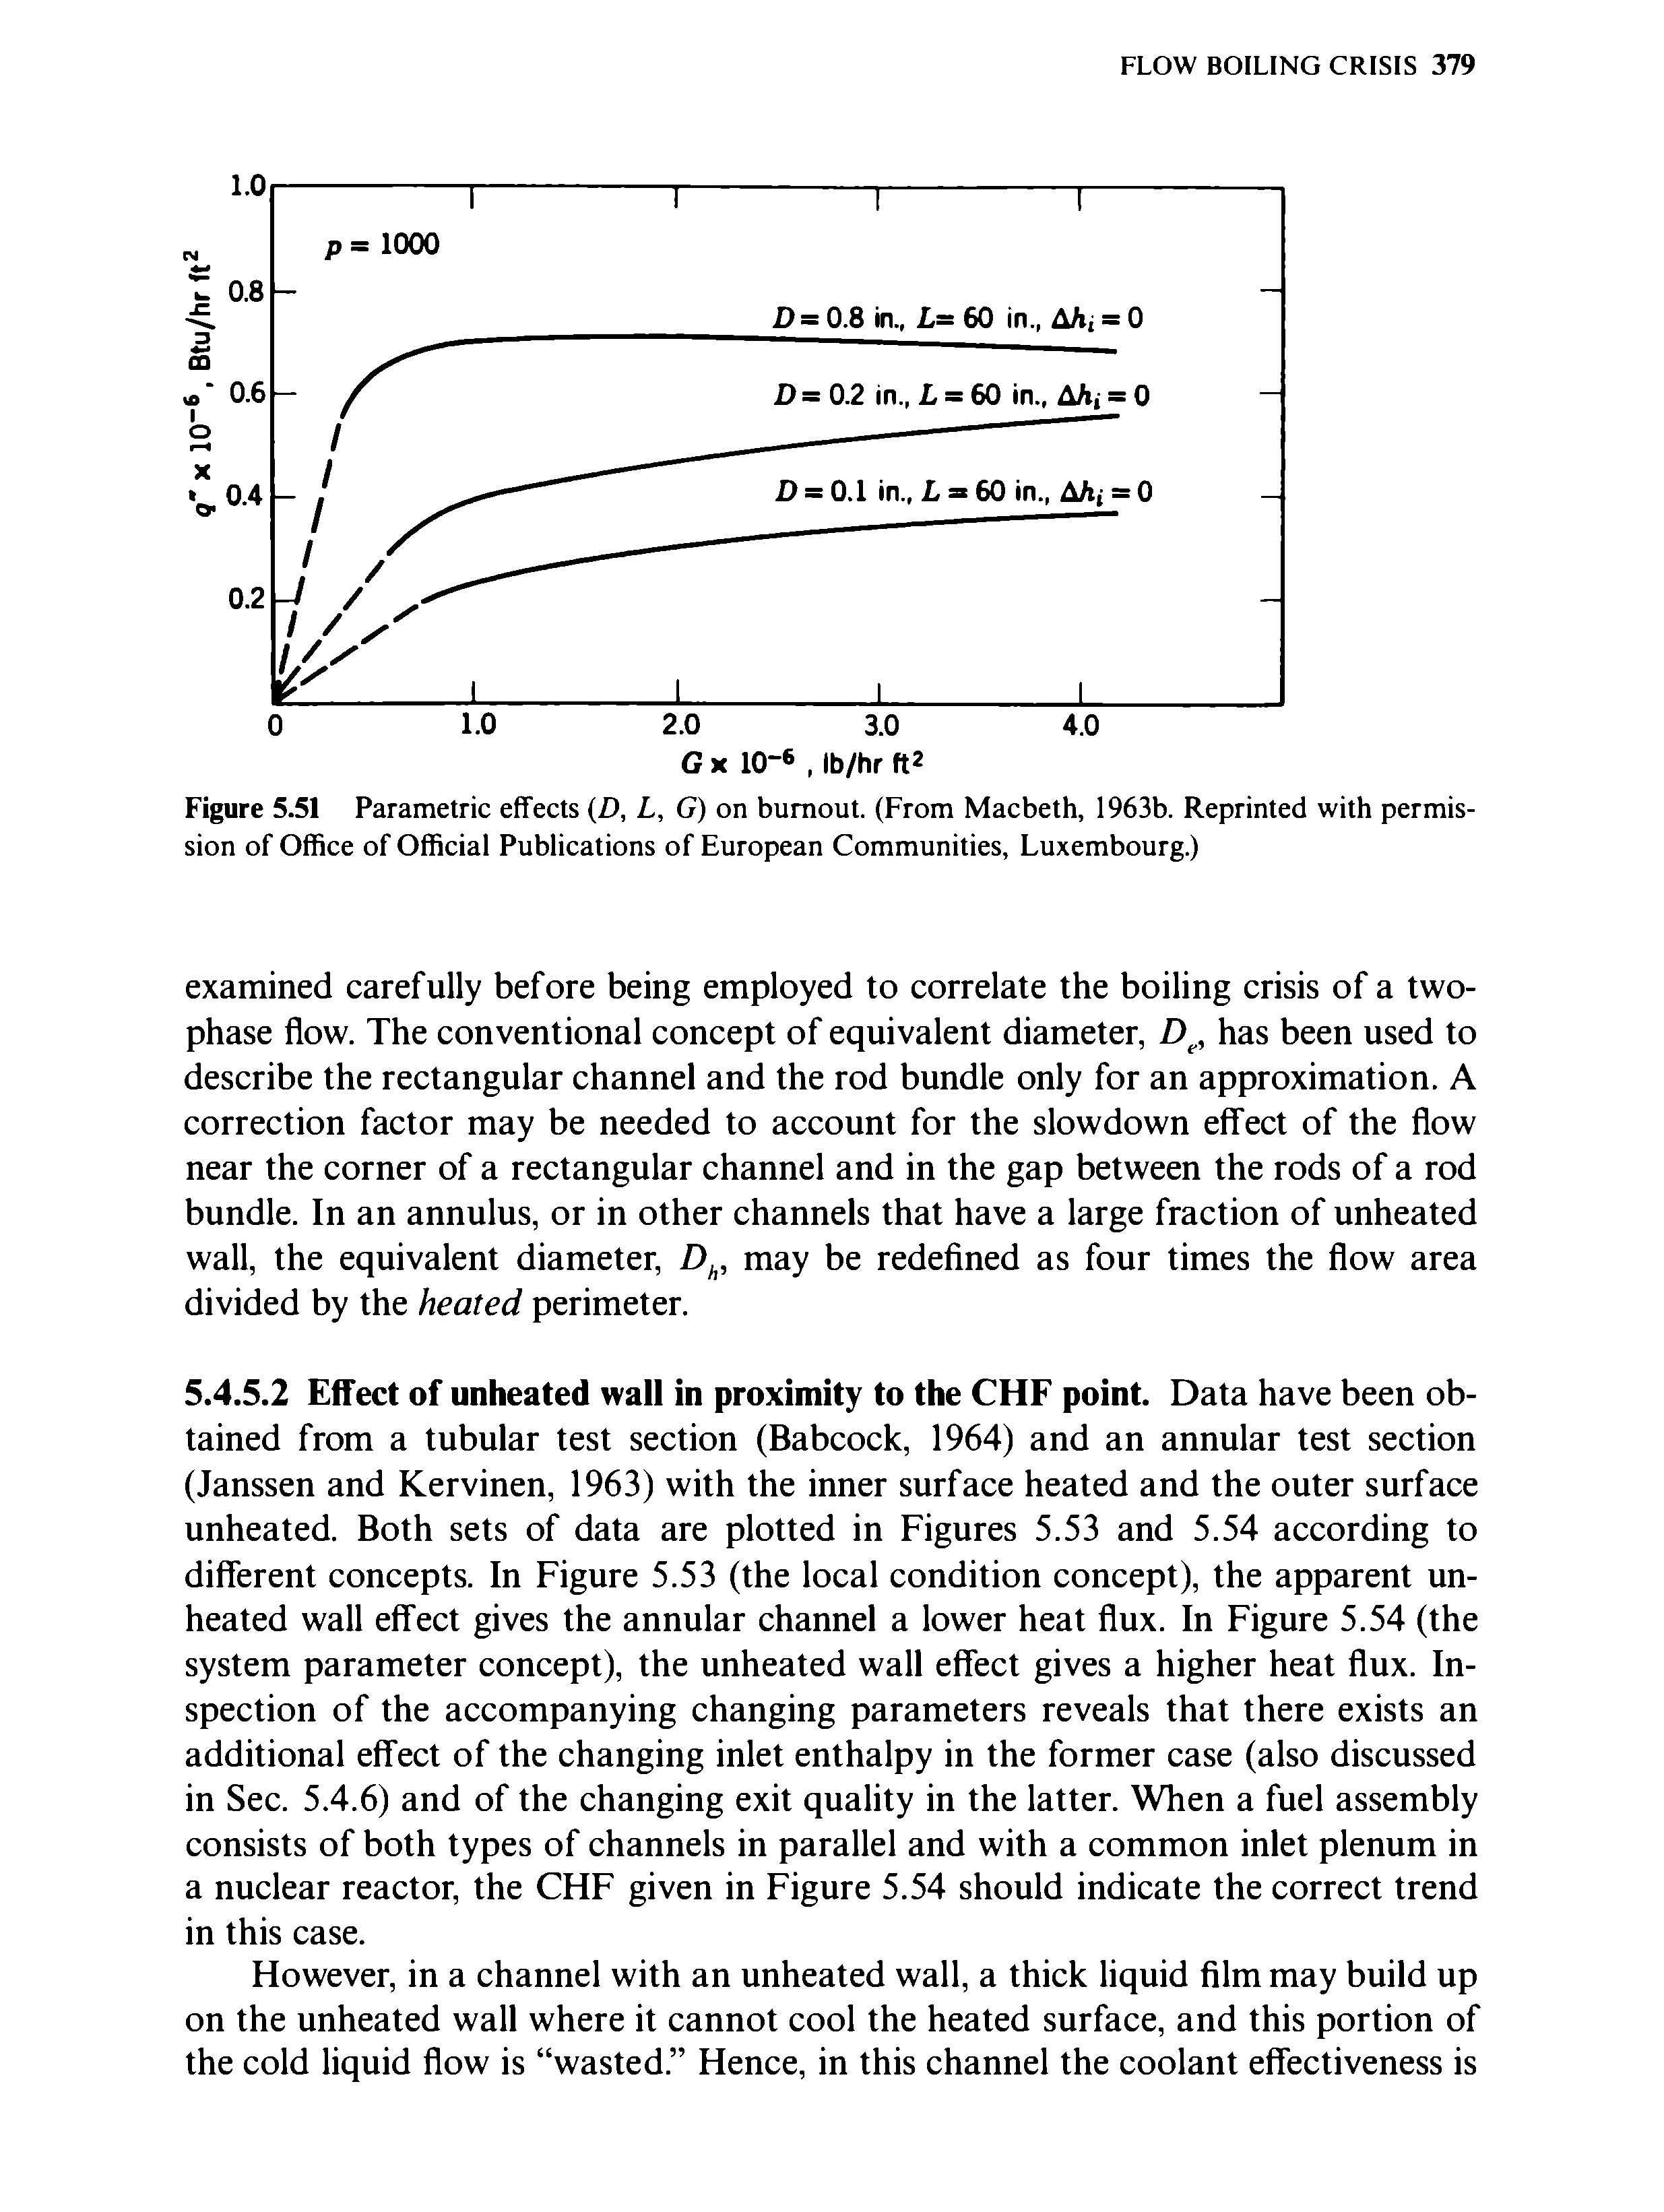 Figure 5.51 Parametric effects (D, L, G) on burnout. (From Macbeth, 1963b. Reprinted with permission of Office of Official Publications of European Communities, Luxembourg.)...